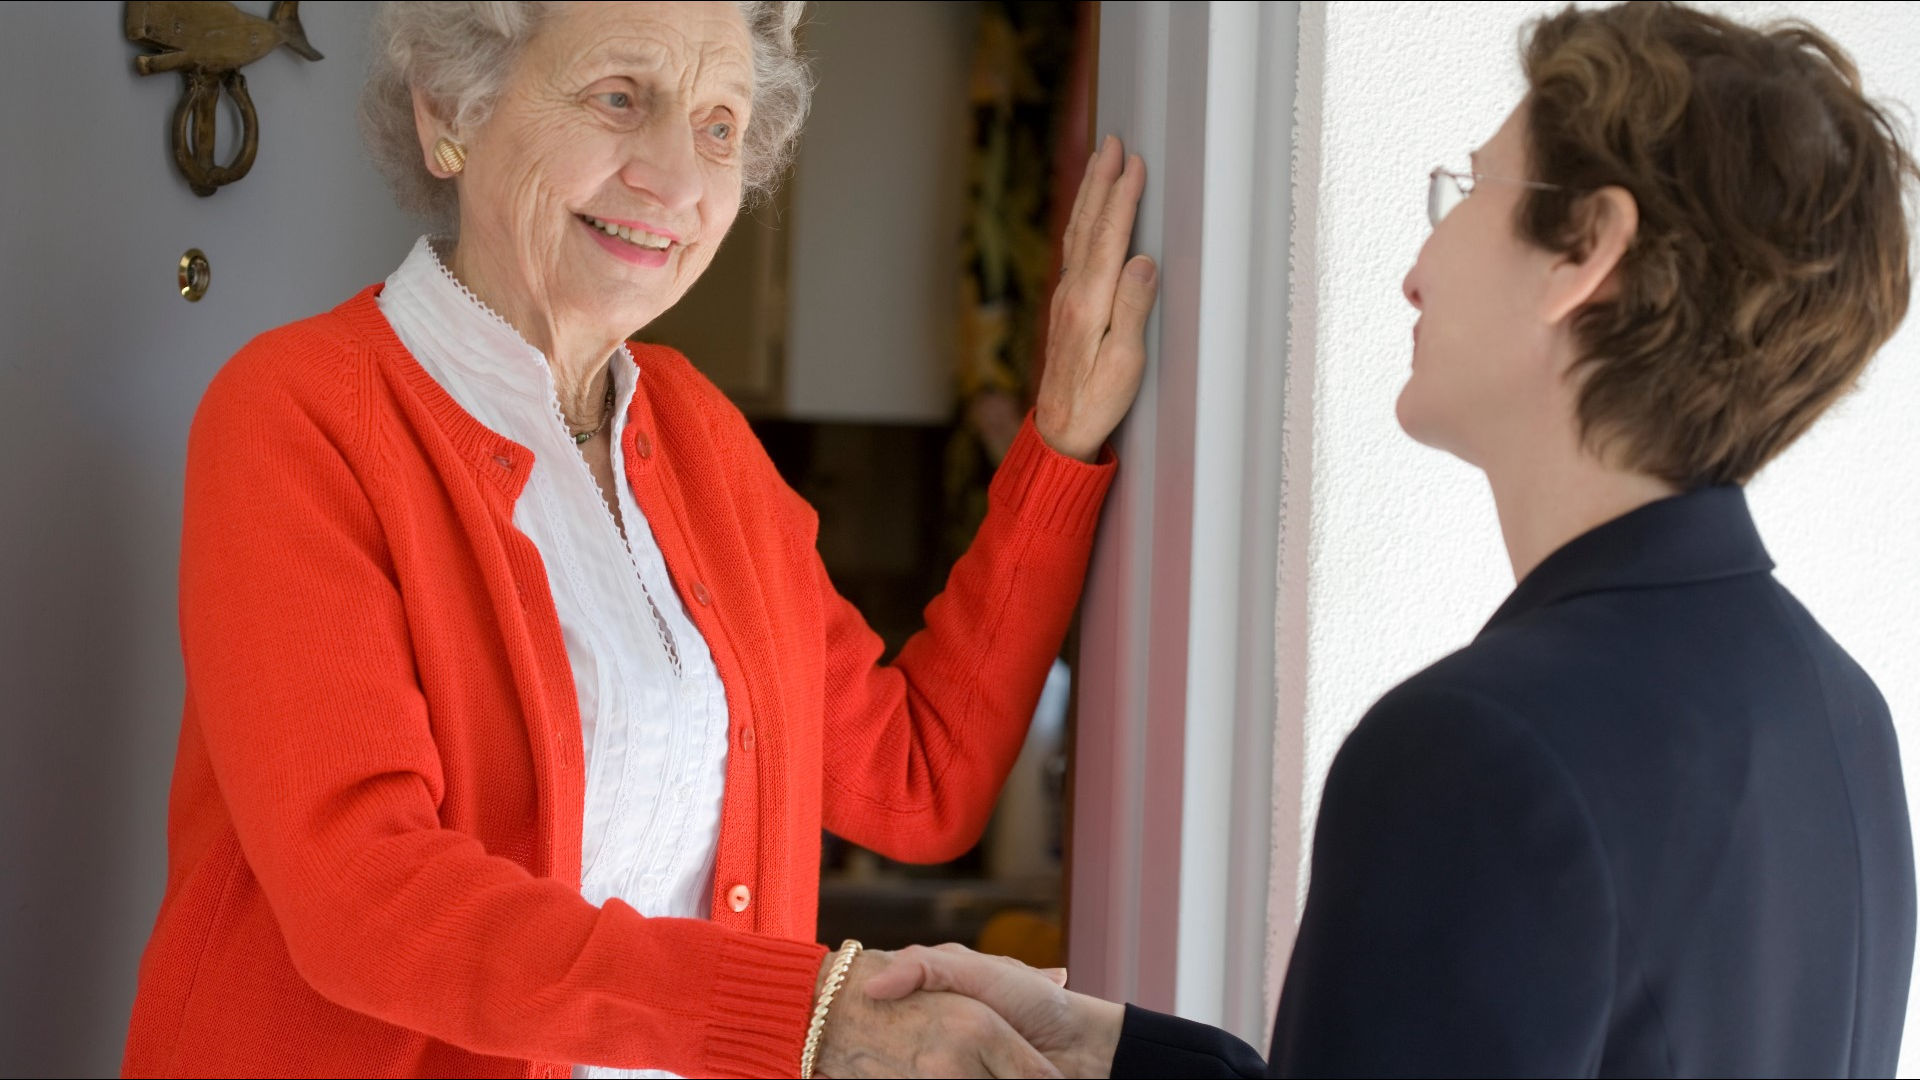 The Senior Millage helps seniors in Kent County by offering a number of programs meant to help make life a little bit easier. The goal is to help those 60 years old or older live more comfortably in their own homes.